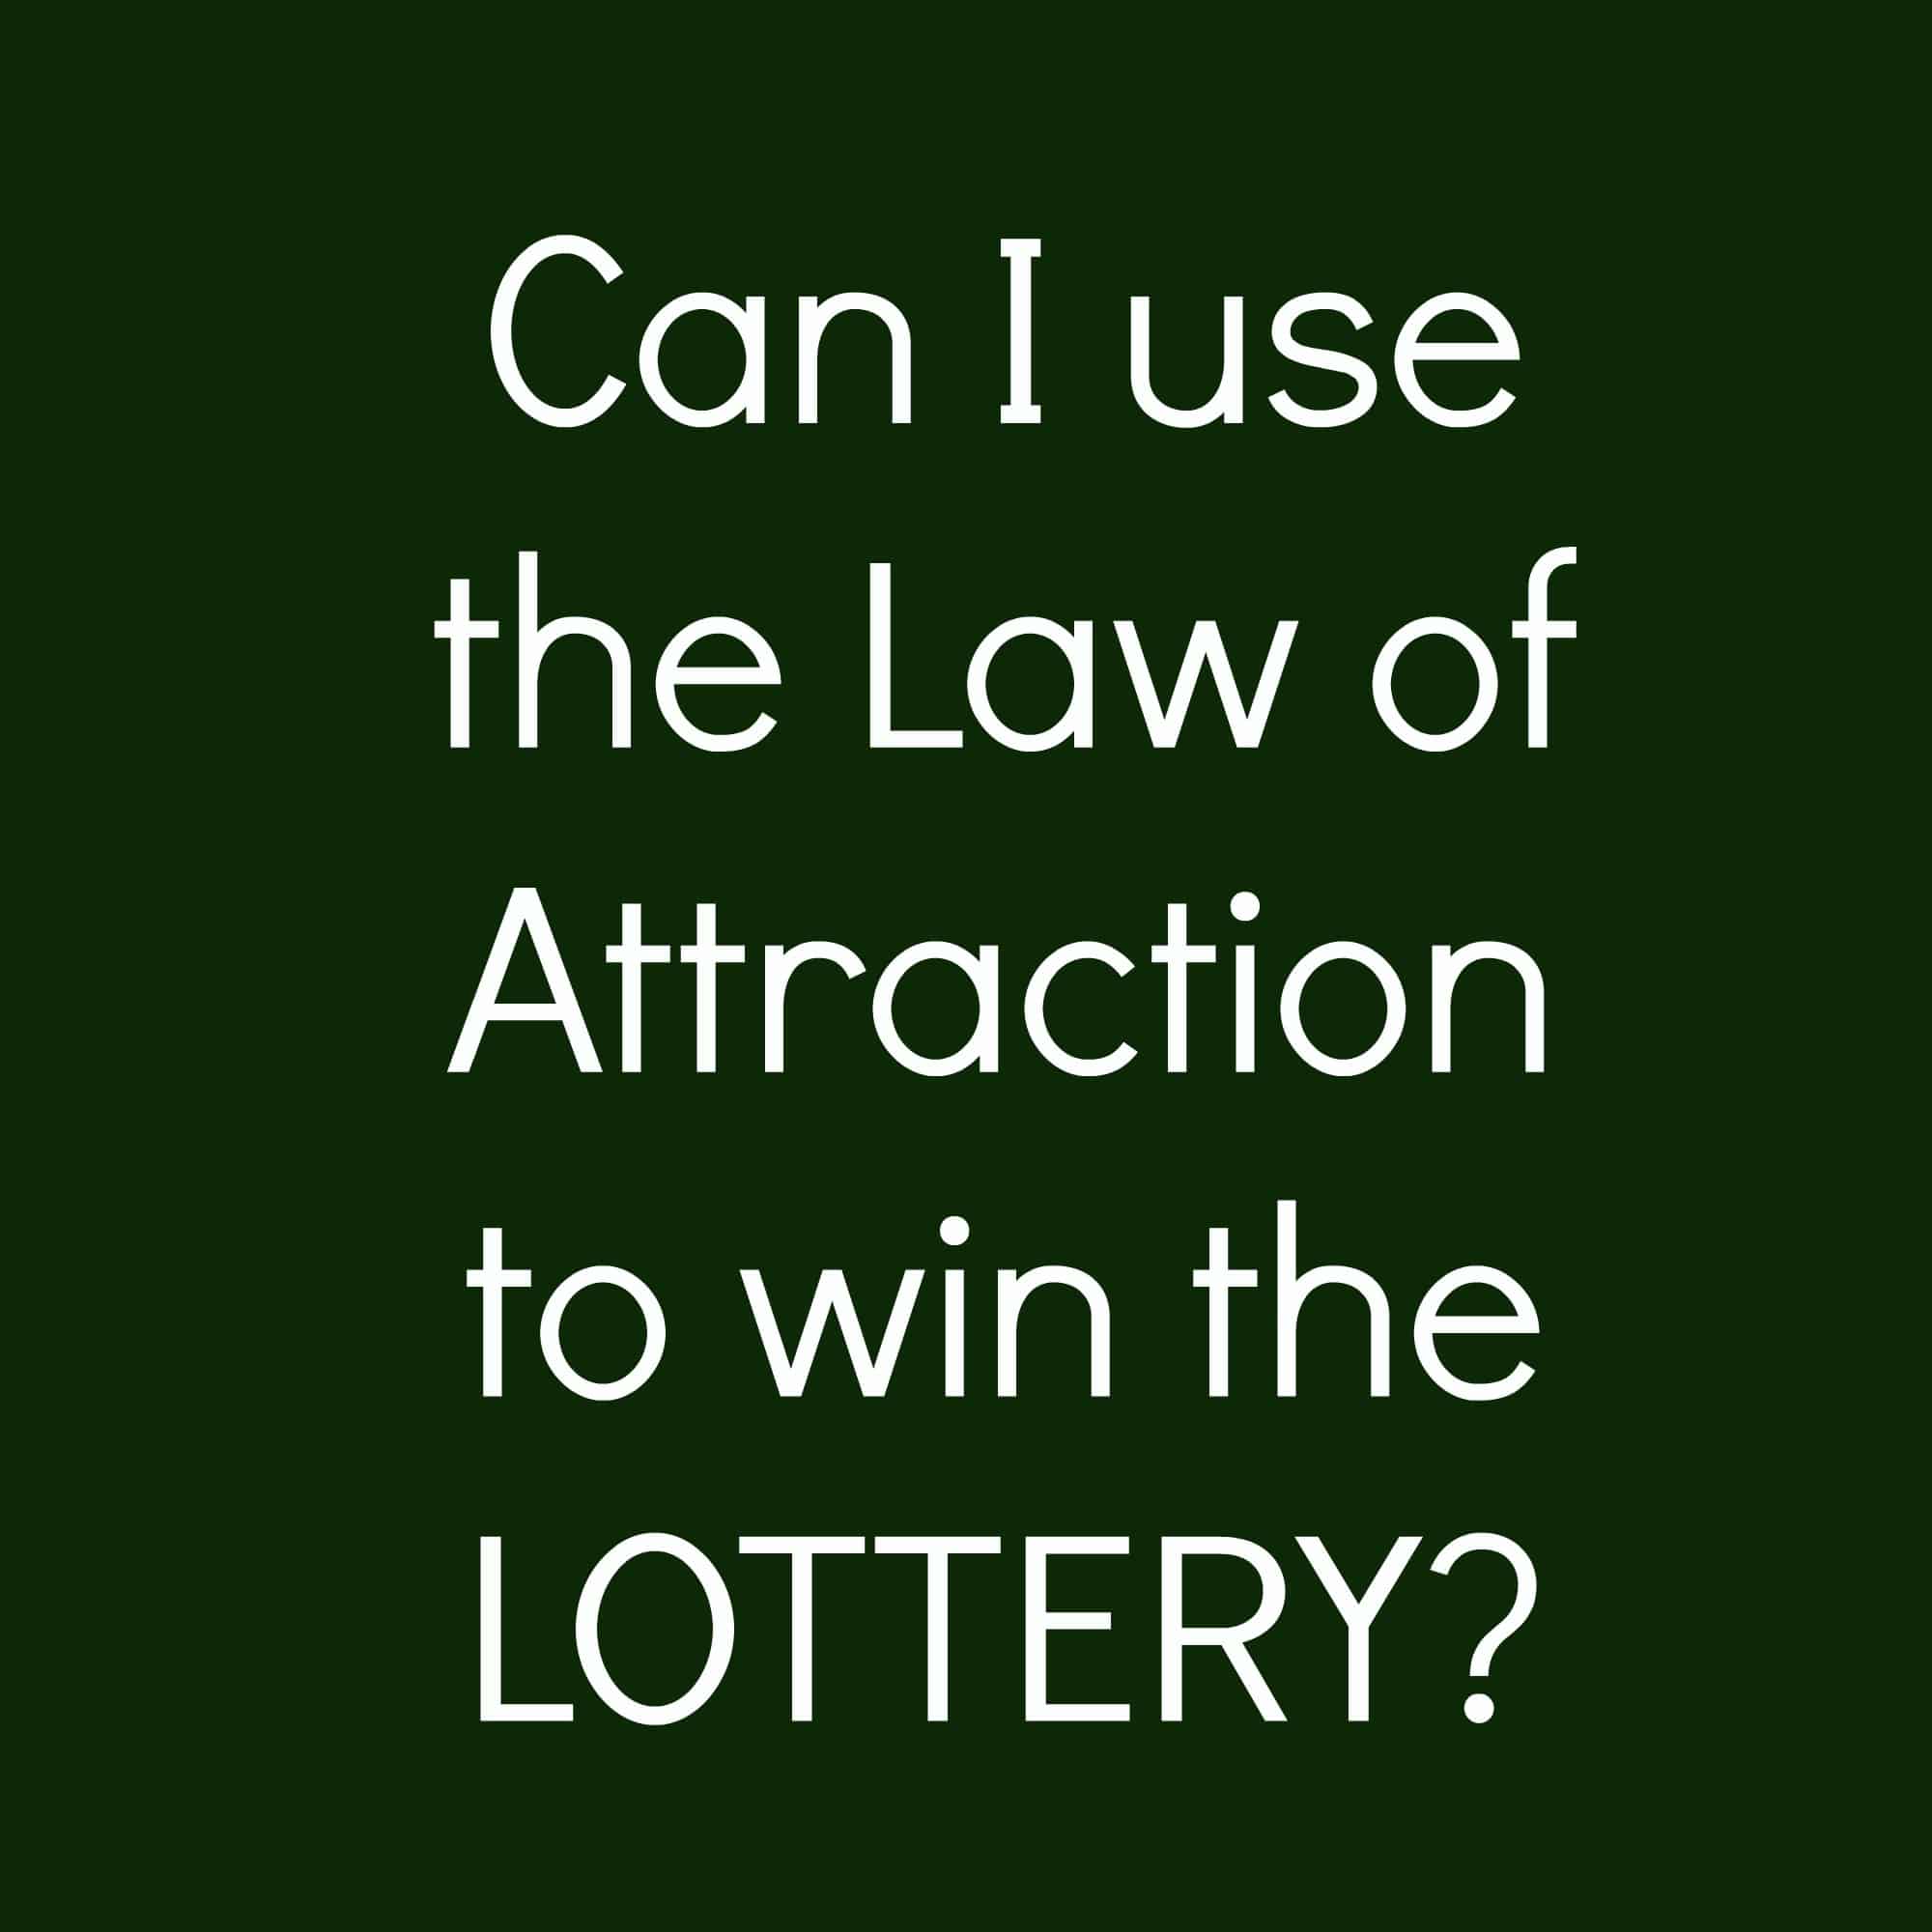 Can I use the law of attraction to win the lottery? Let's have a go with this 30 day law of attraction win the lottery challenge